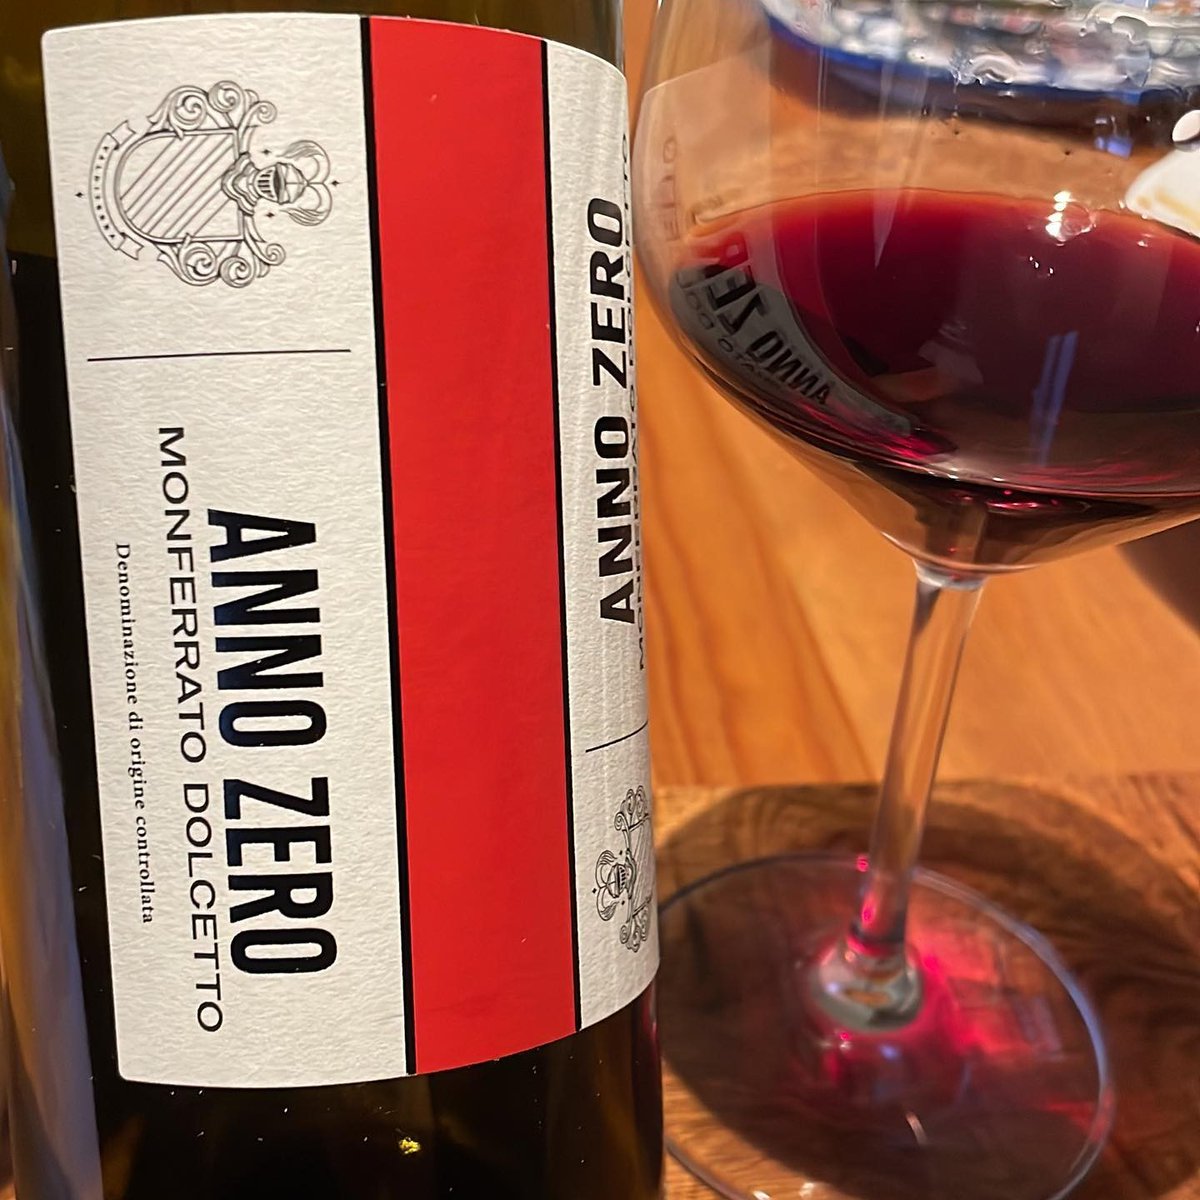 Something for the weekend, this fresh young red wine made from 100% Dolcetto, is suitable for any occasion. Ruby red colour, bursting with red cherries, hints of violet and well-balanced tannins with a slightly spicy note at the end. #thewinebuff #casualdining #weekendvibes